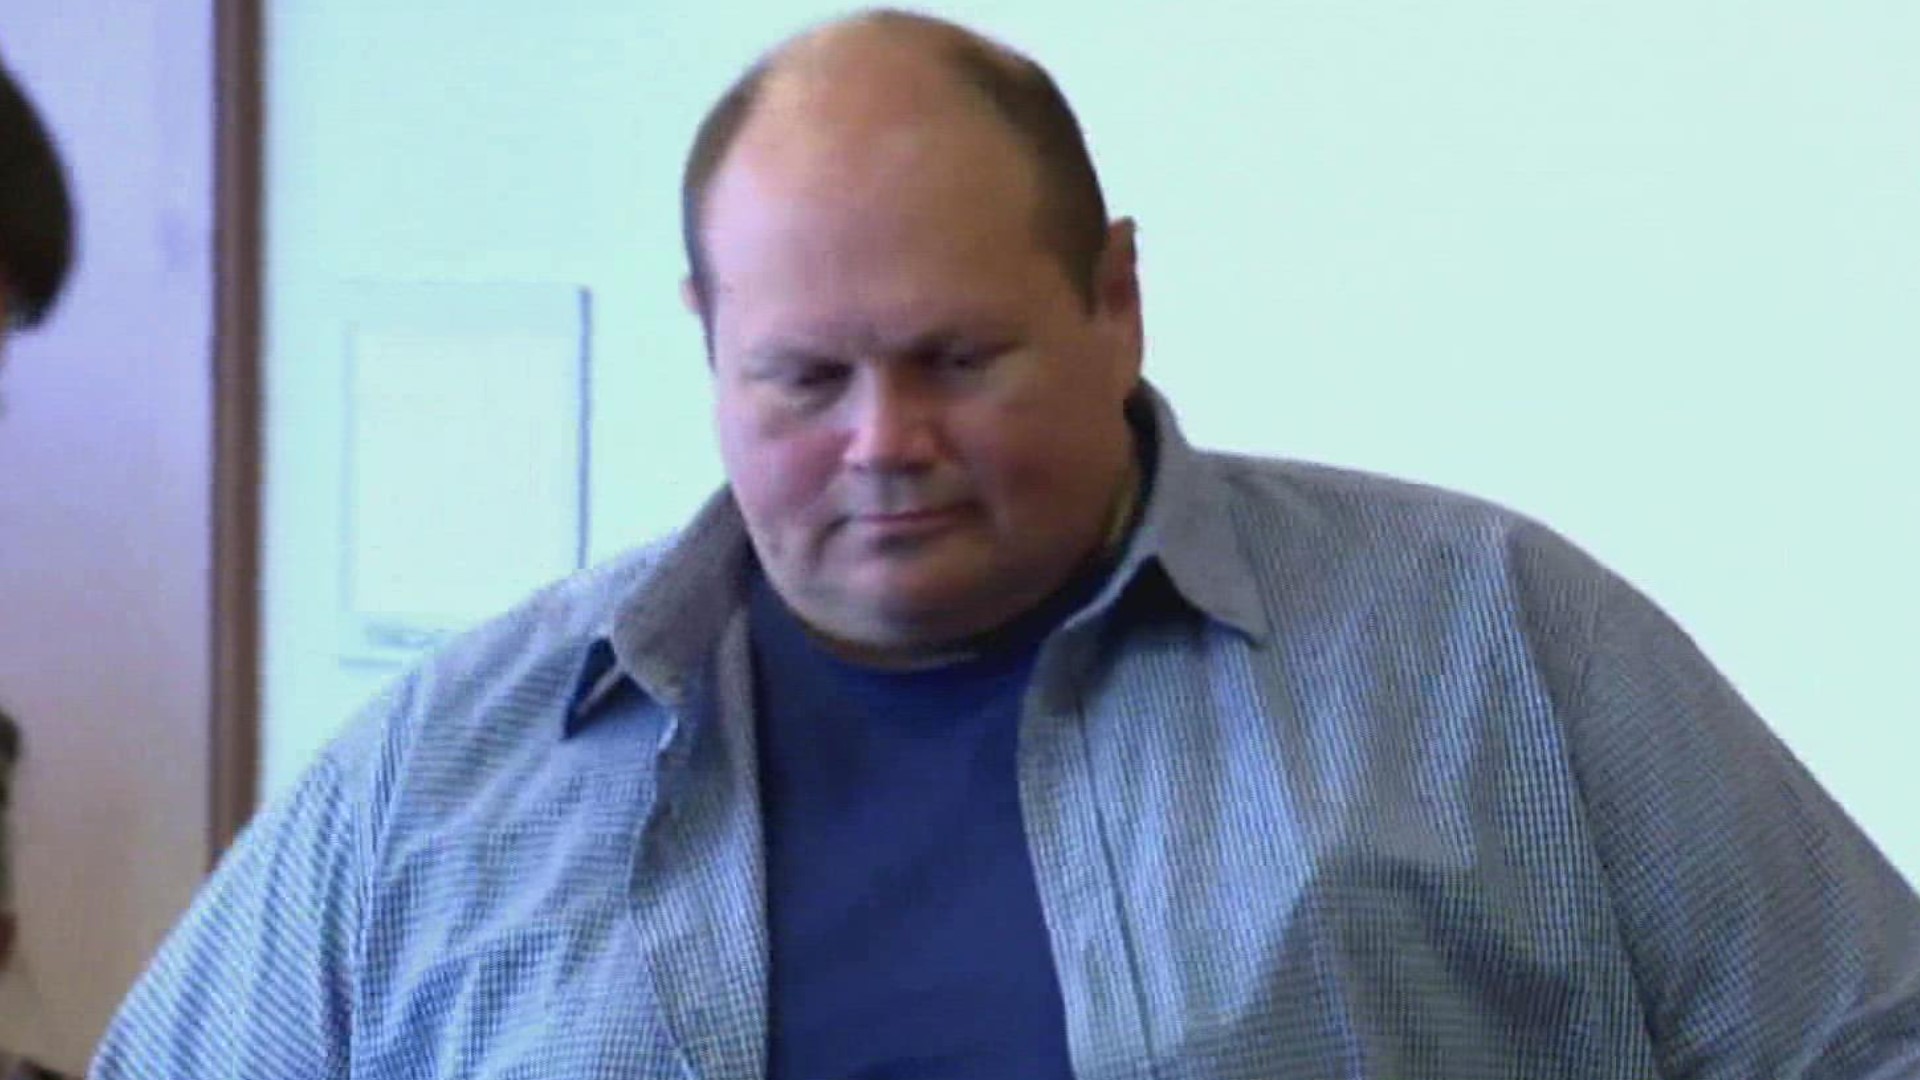 Eddie Tipton is serving a 25-year sentence for rigging computers to win jackpots. He says he was pressured to plead guilty for a crime he didn't commit.